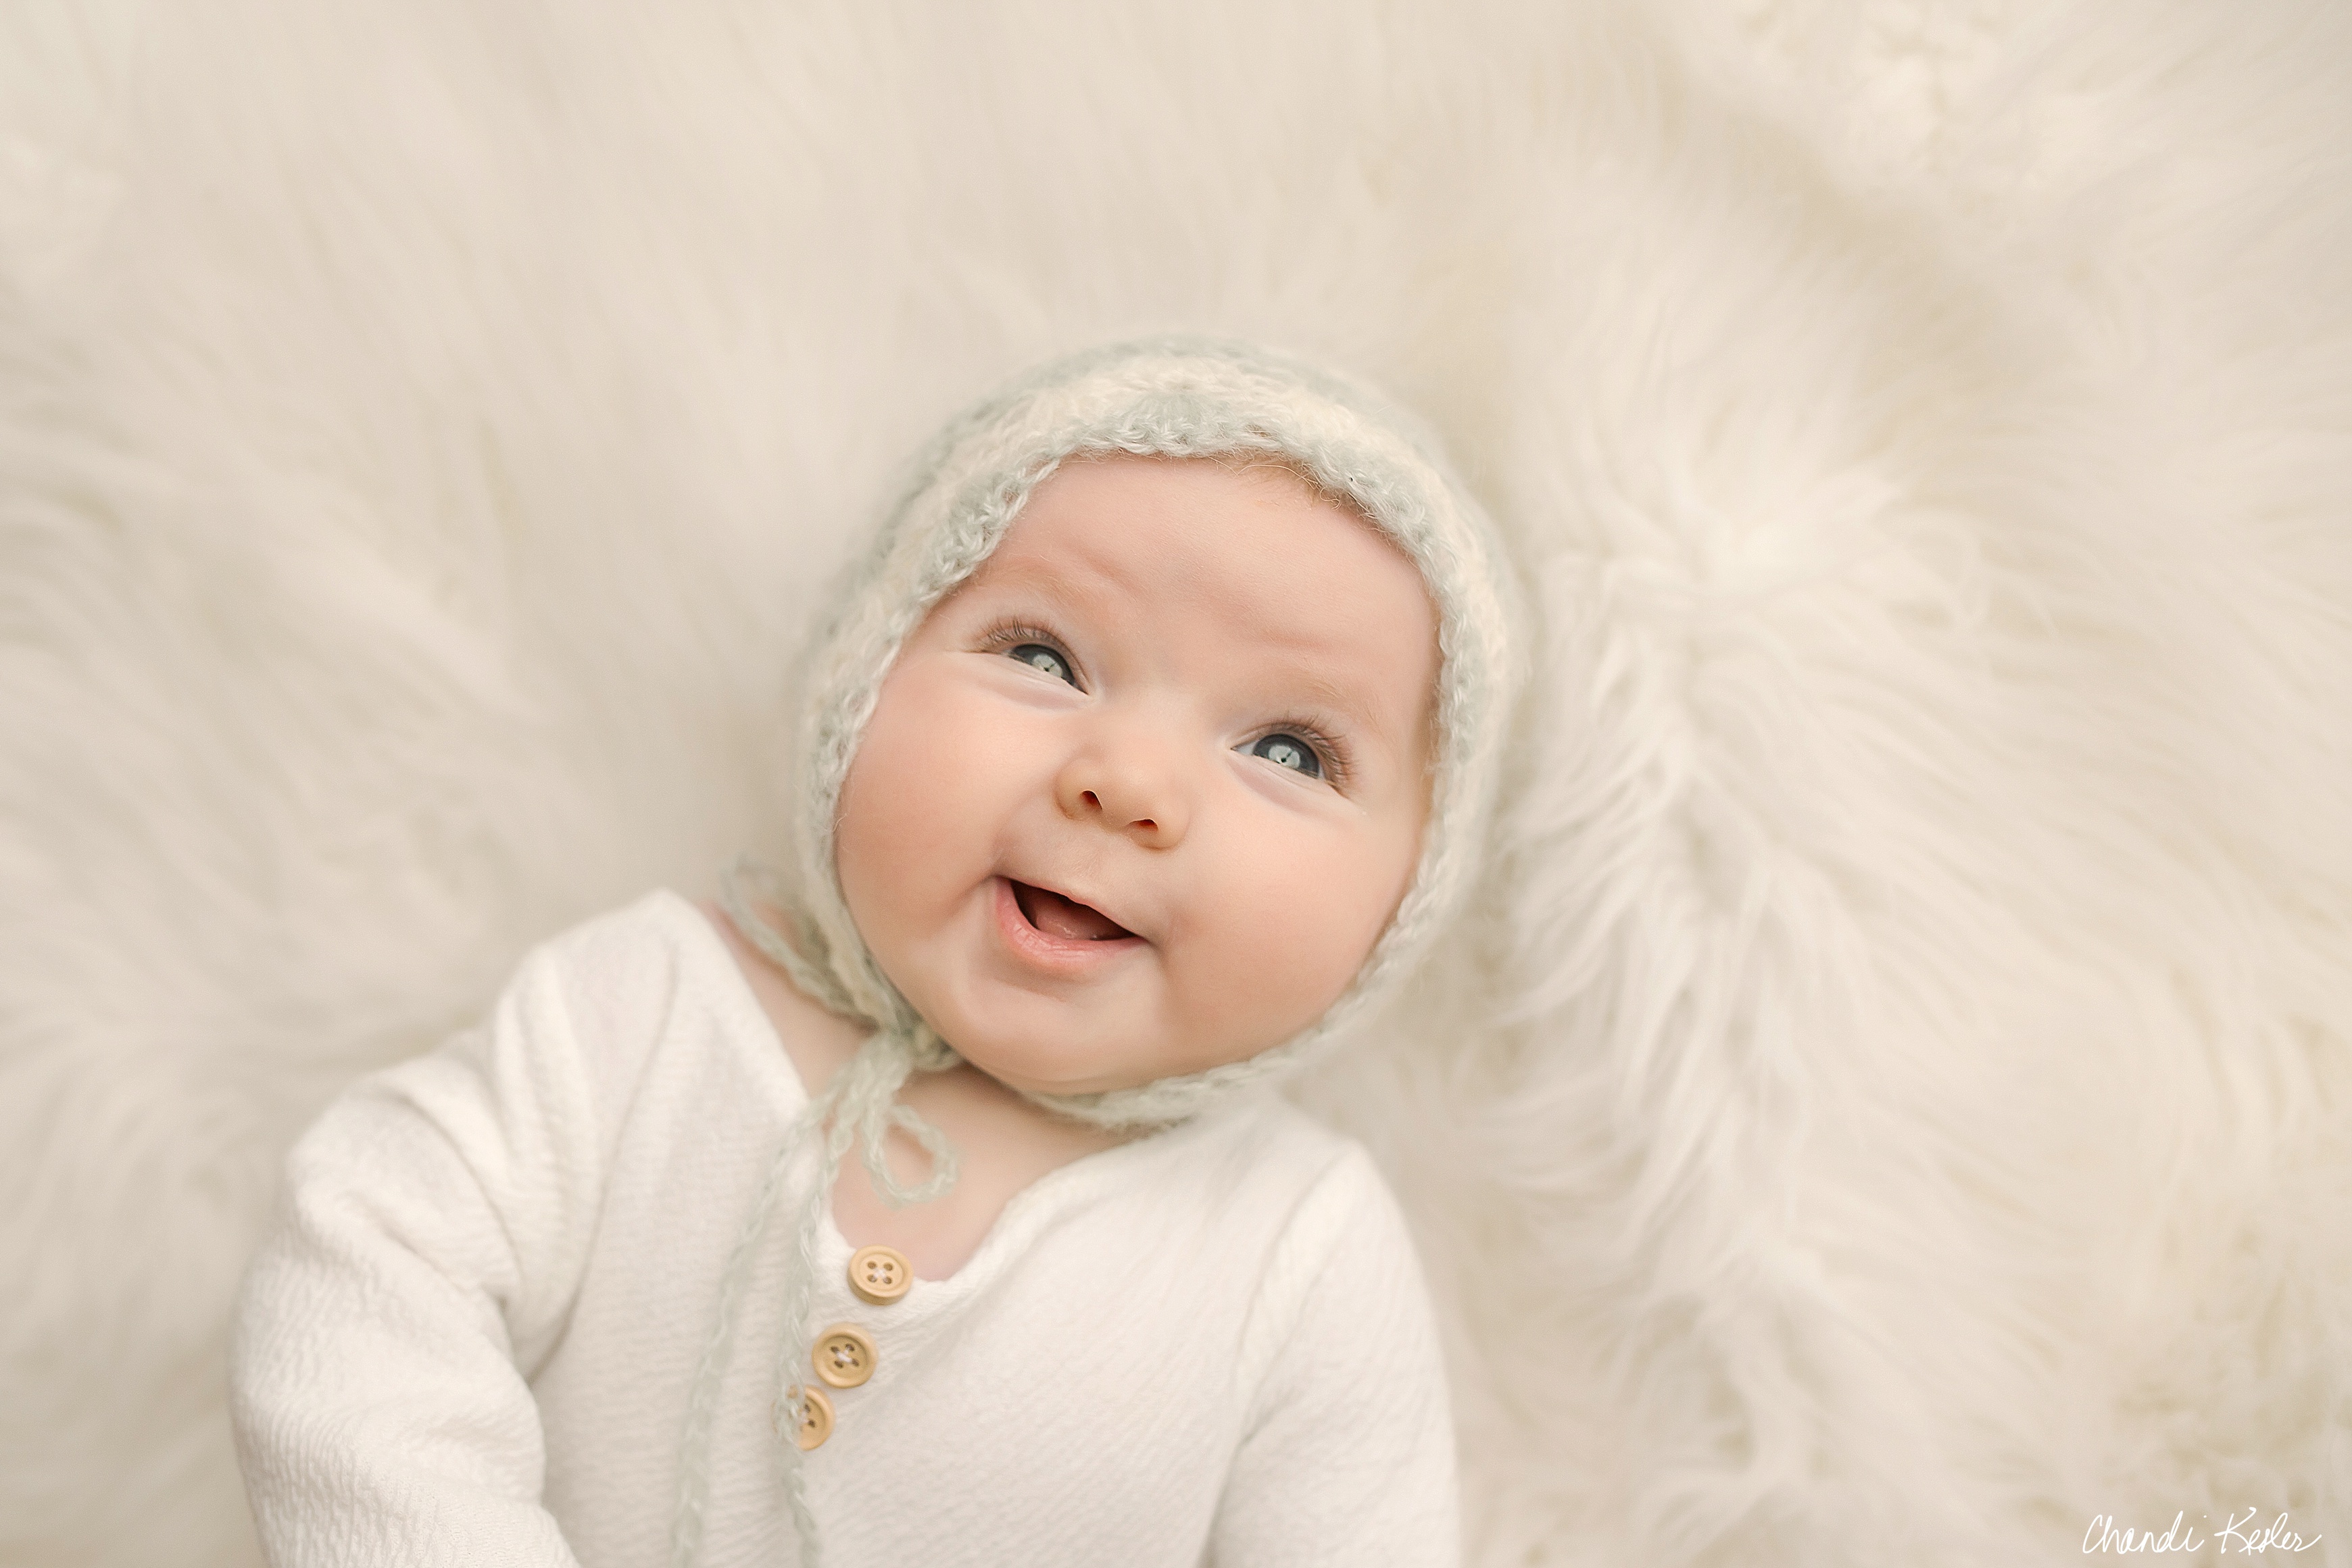 Mackinaw IL Photographer | Chandi Kesler Photography | 3 Month Picture Ideas